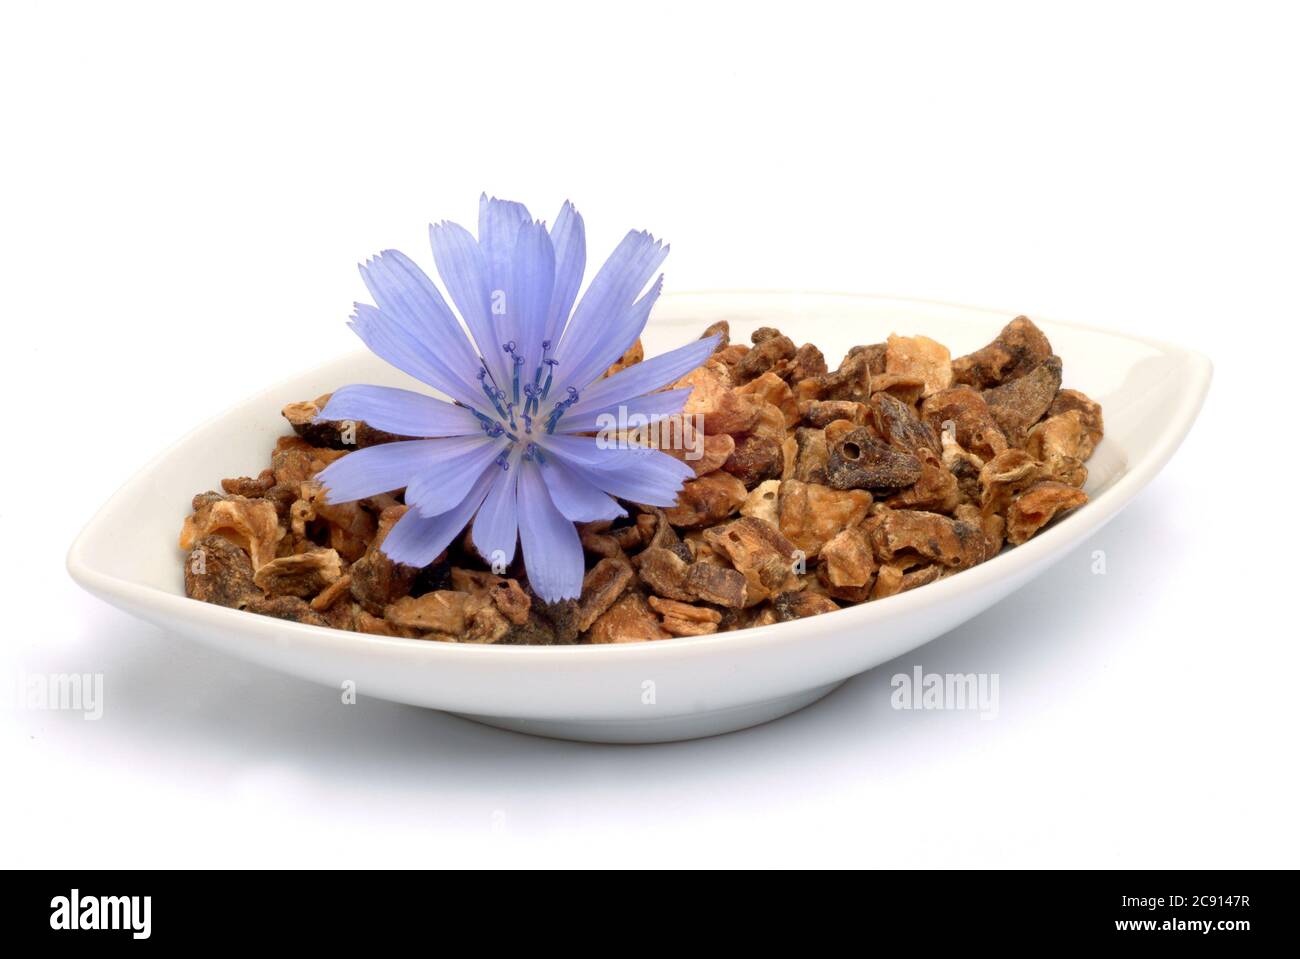 Dried root. Common or Common chicory, Cichorium intybus), and chicory. This plant has been used since the Middle Ages the manufacture of medicines. In Stock Photo